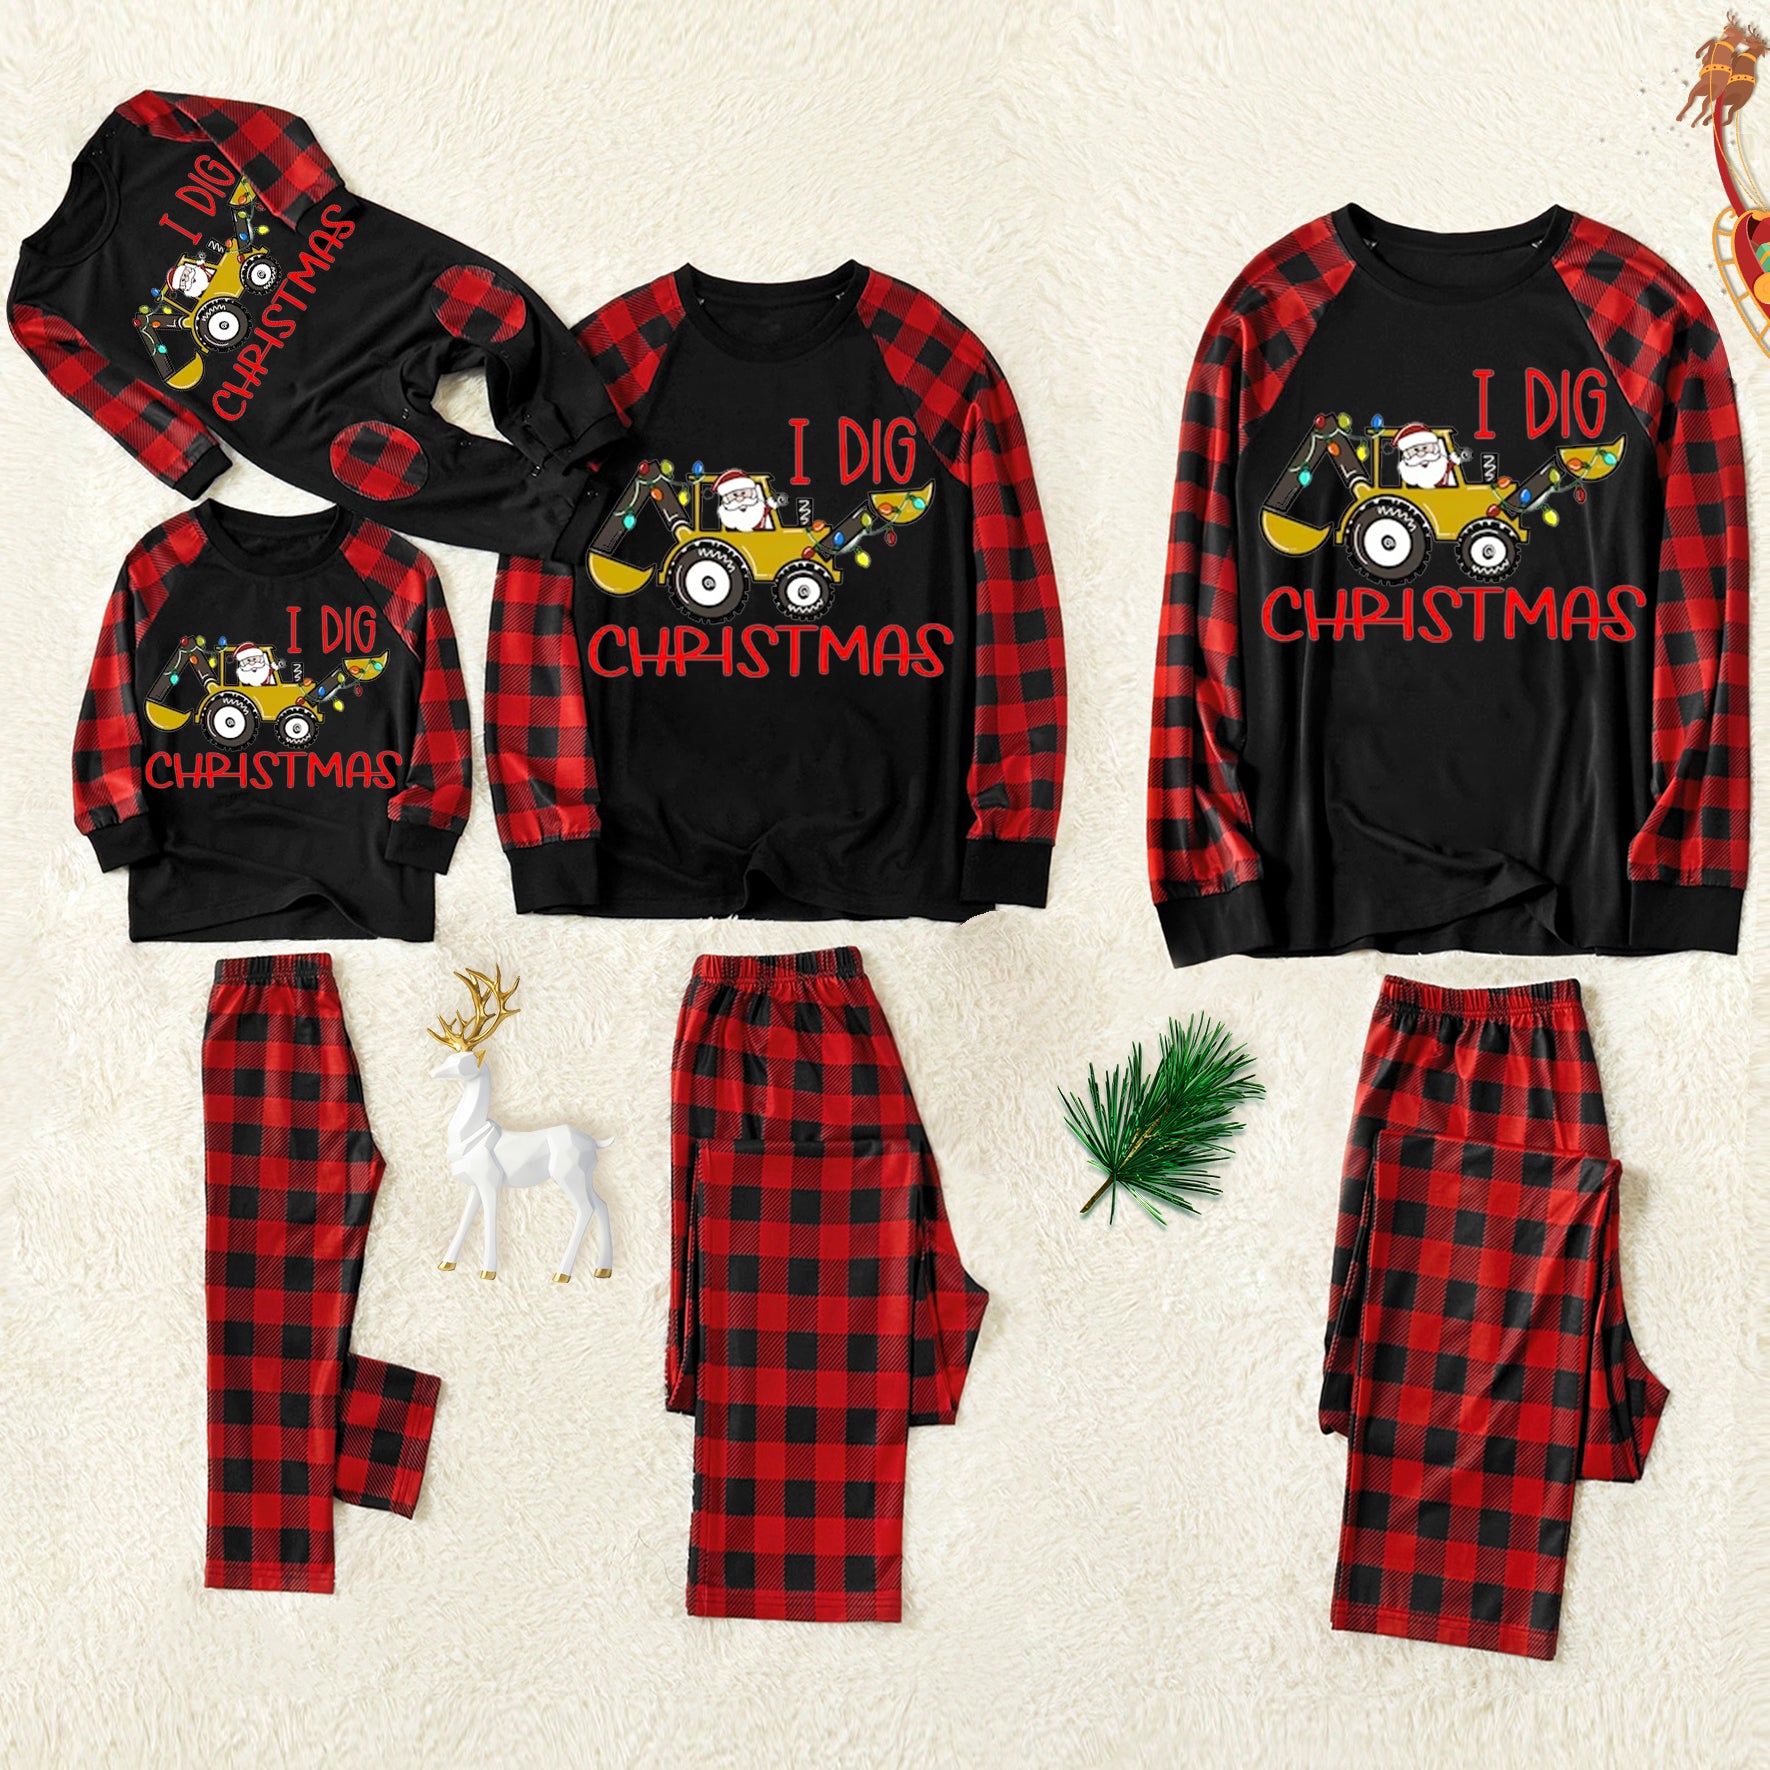 Christmas ‘I Dig Christmas“ Letter Print Patterned Contrast Black top and Black & Red Plaid Pants Family Matching Pajamas Set